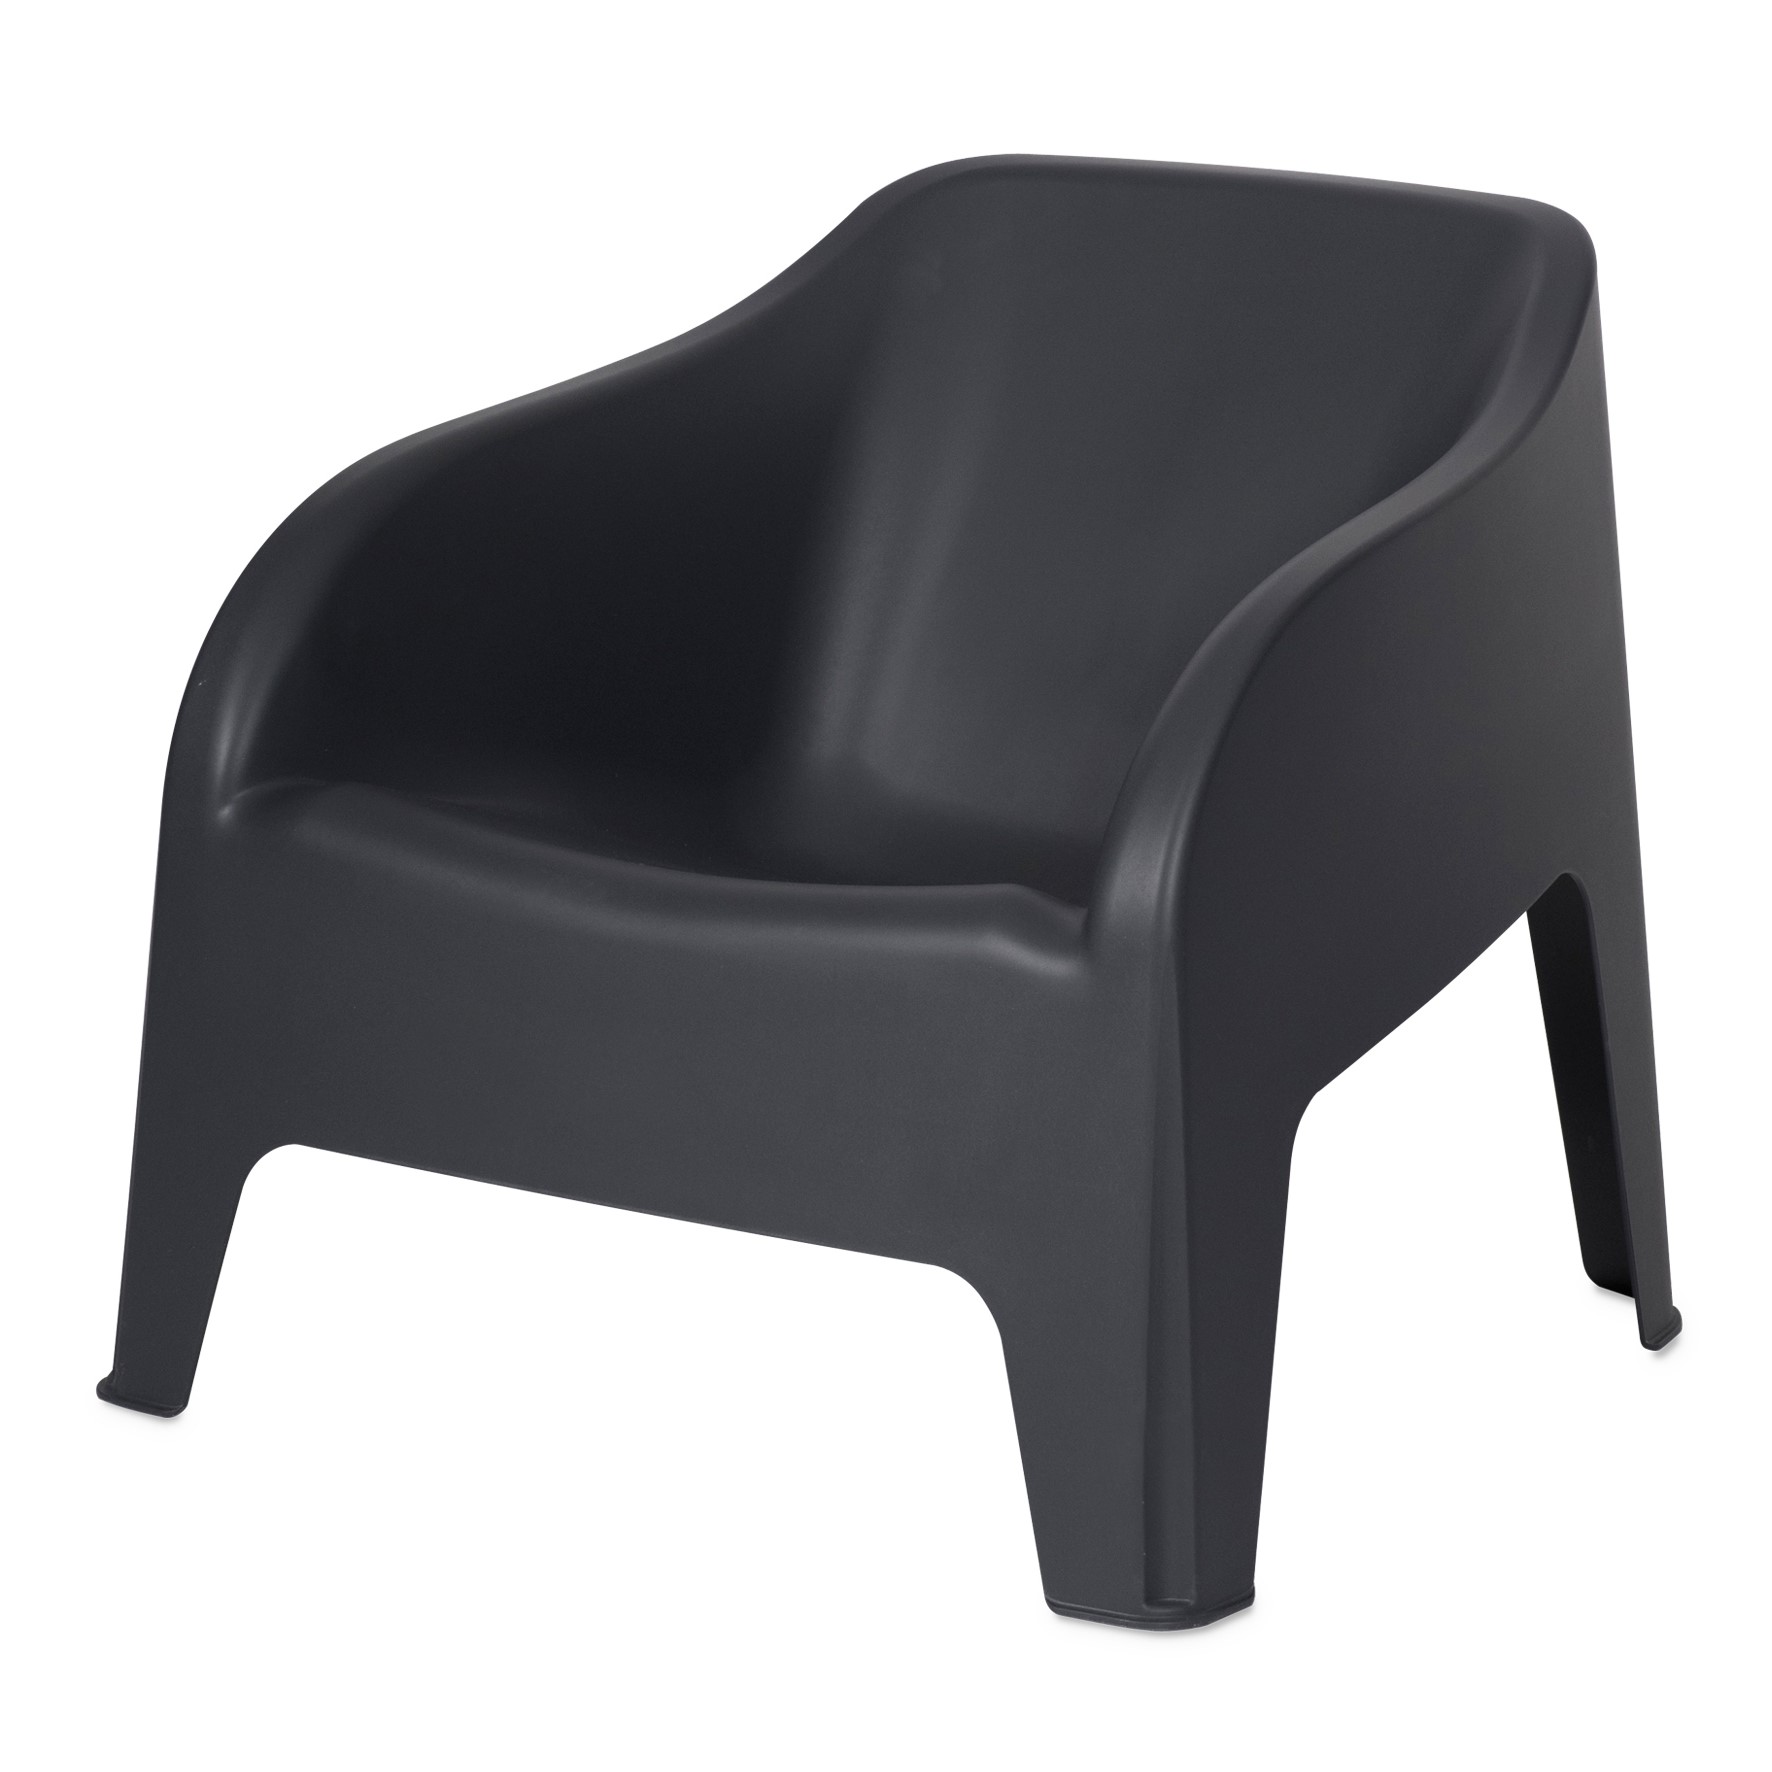 PETRA CHAIR ANTHRACITE